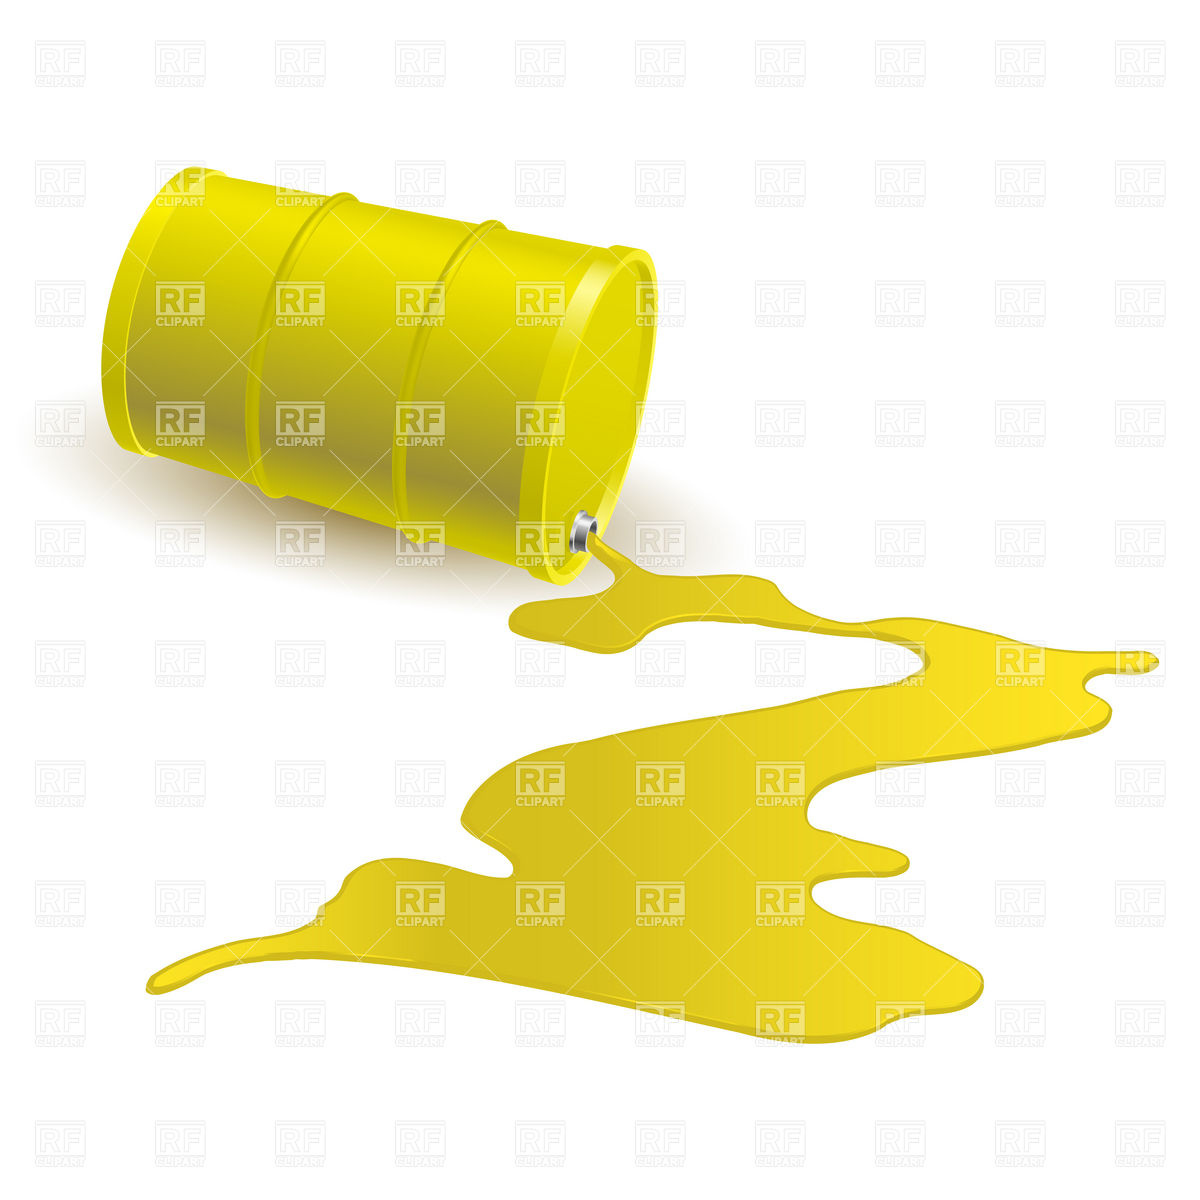 Oil Barrel With Spilled Yellow Liquid 6944 Download Royalty Free    